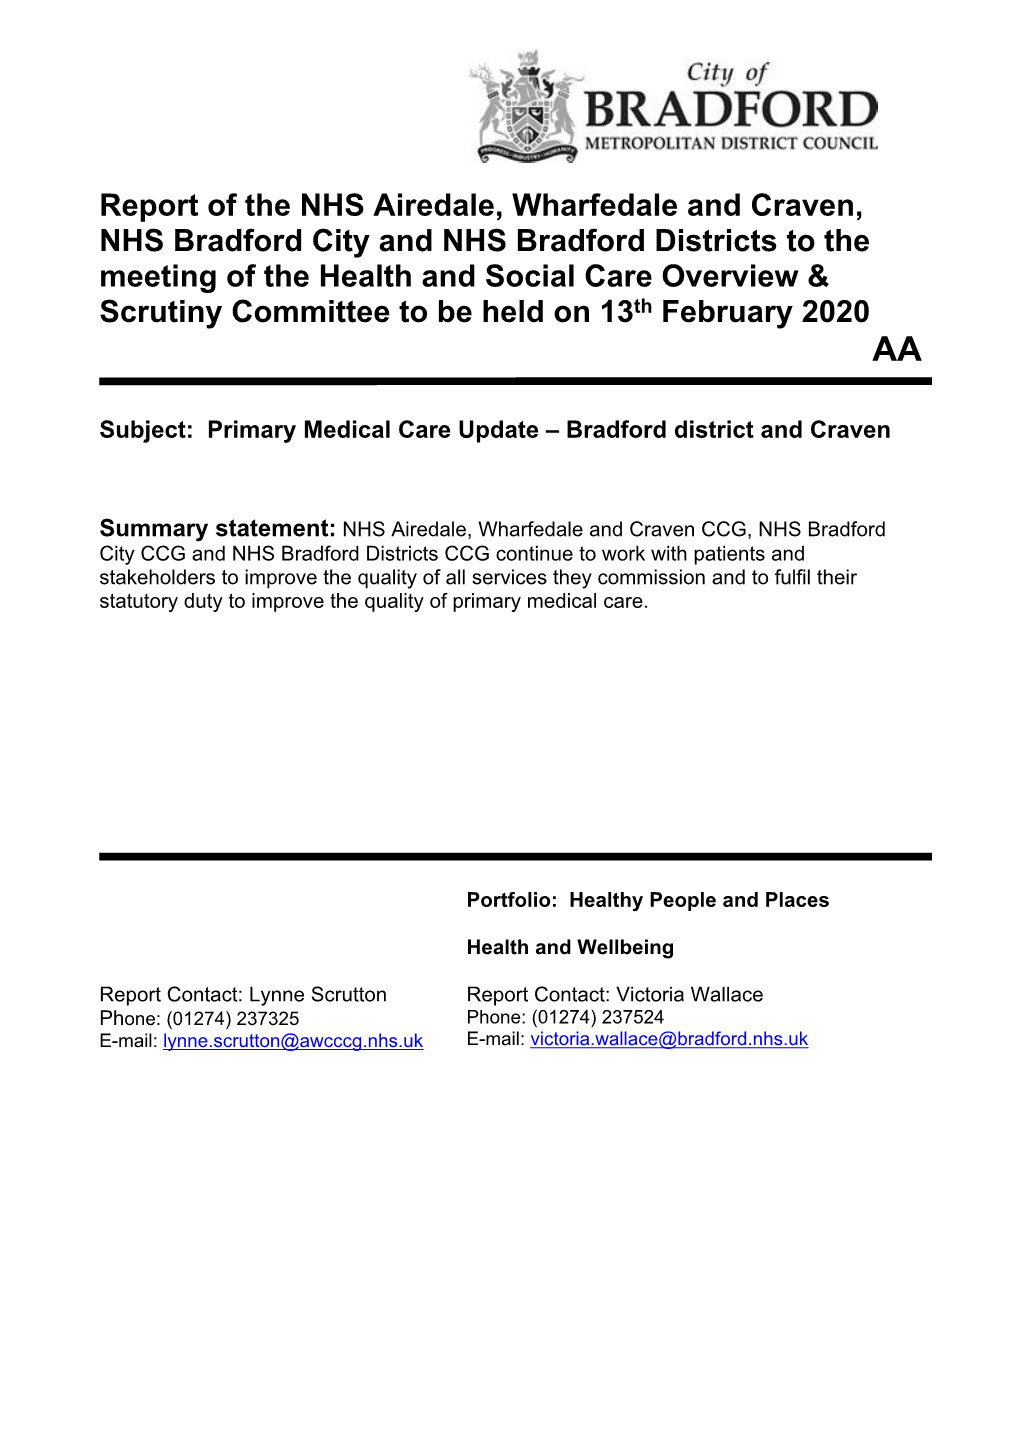 Report of the NHS Airedale, Wharfedale and Craven, NHS Bradford City and NHS Bradford Districts to the Meeting of the Health